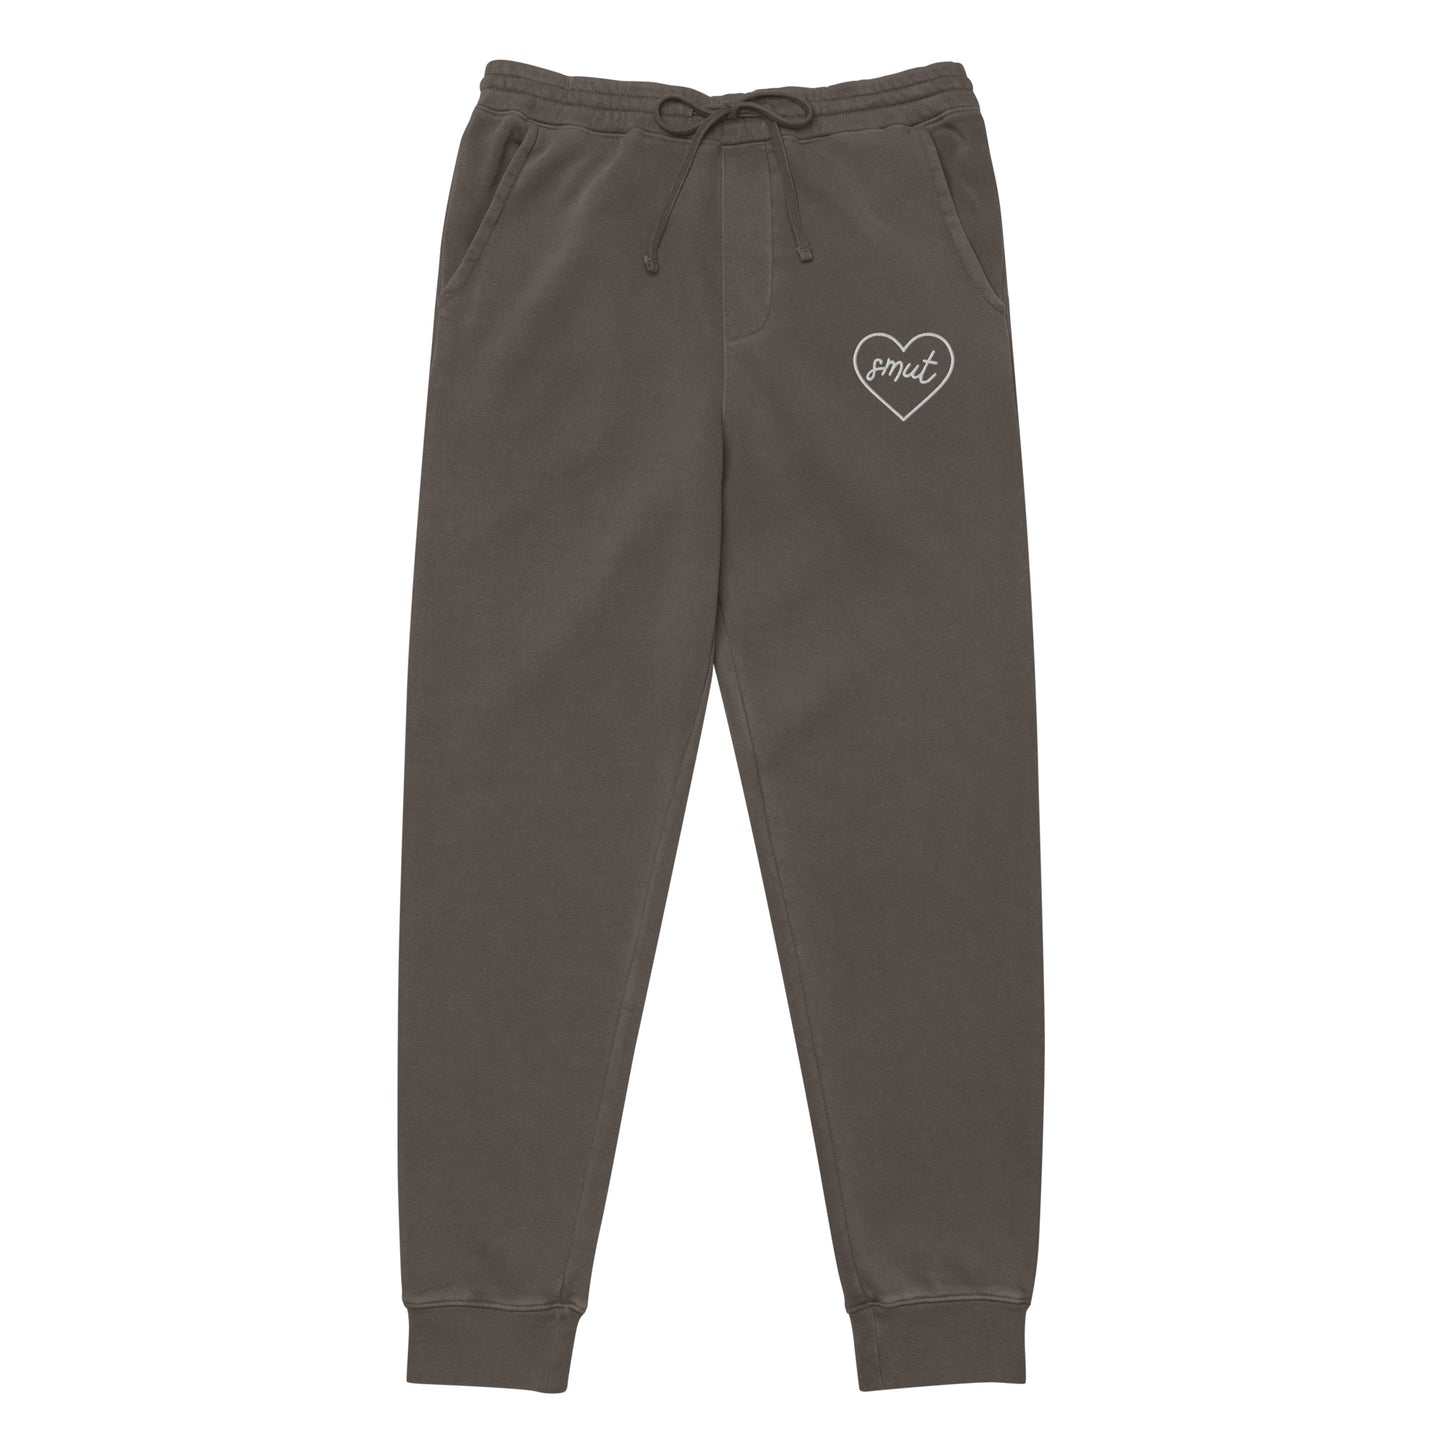 smut heart embroidered joggers